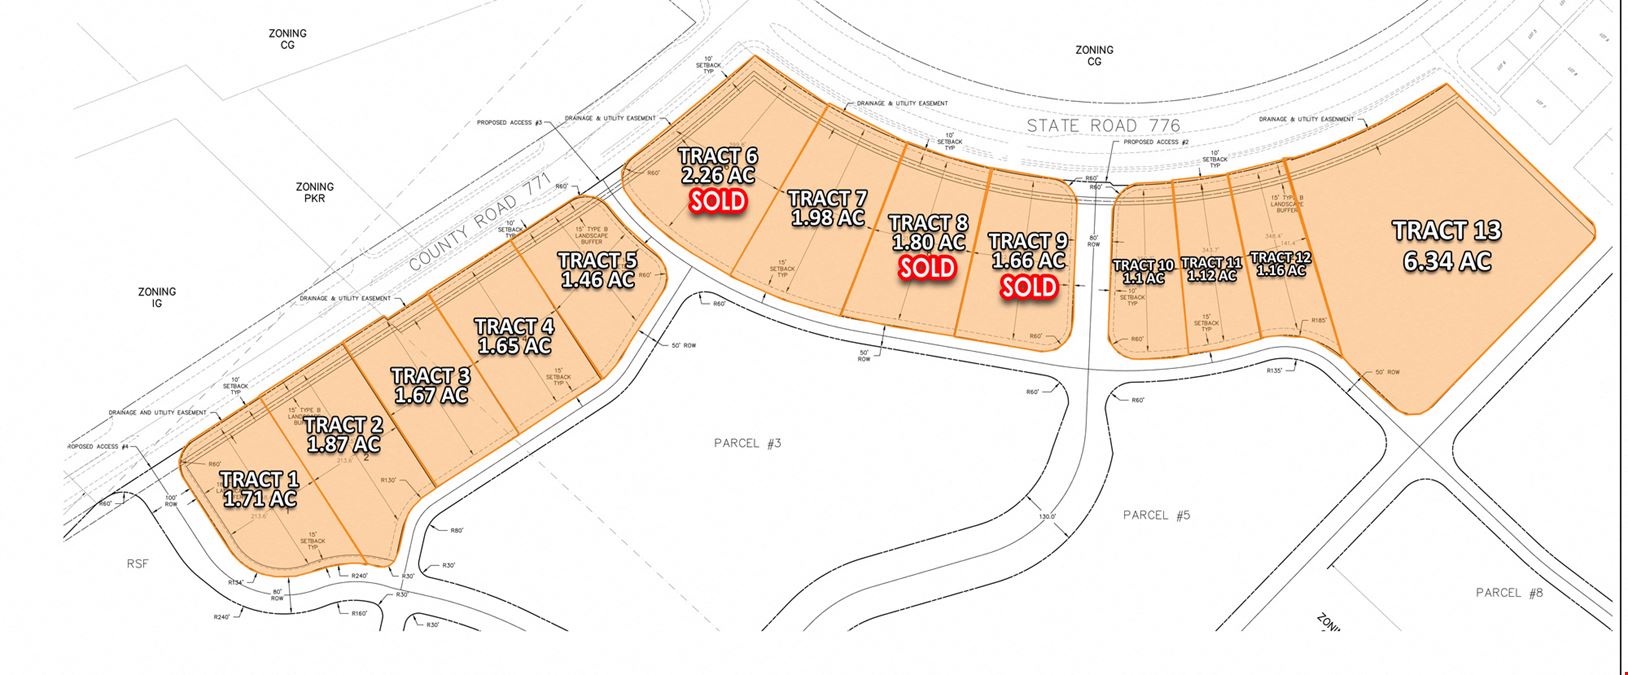 West Charlotte County Retail Parcel - Tract 11